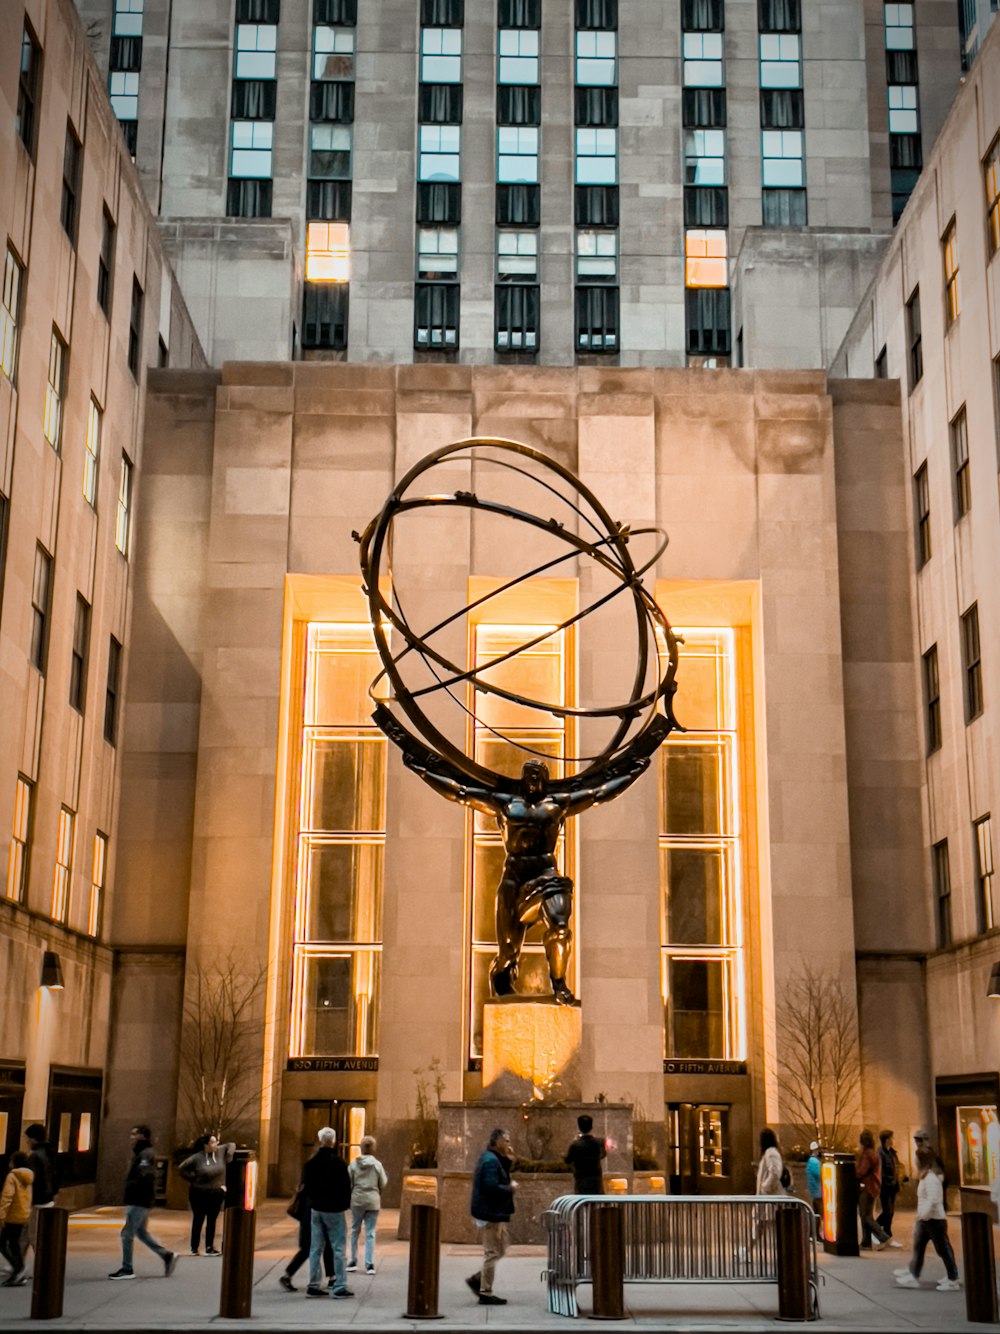 a statue of a person holding a globe in front of a building